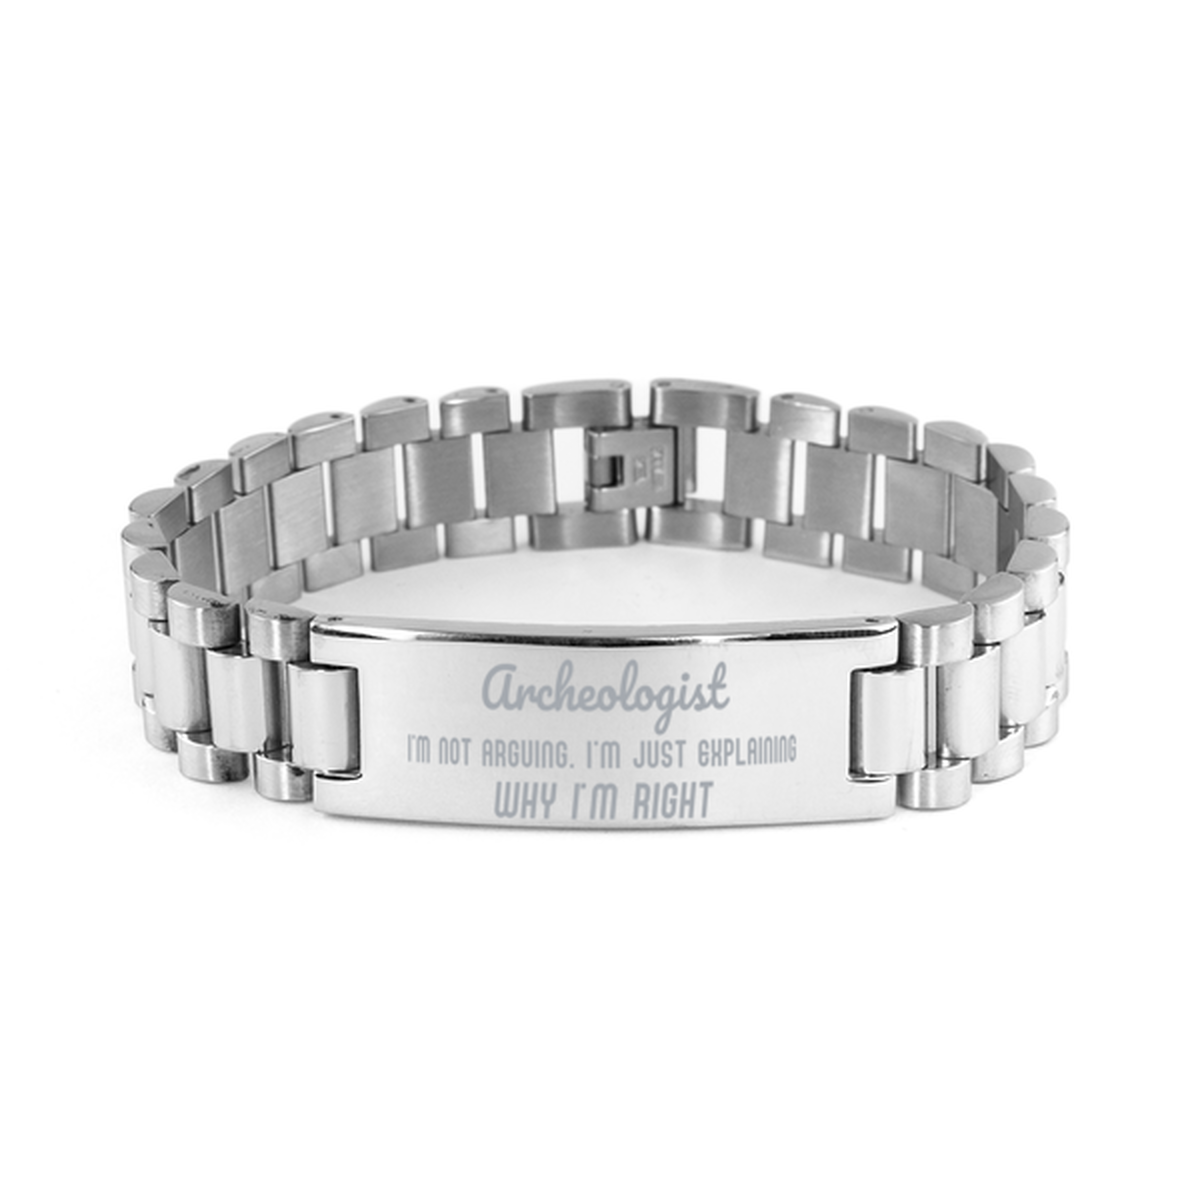 Archeologist I'm not Arguing. I'm Just Explaining Why I'm RIGHT Ladder Stainless Steel Bracelet, Graduation Birthday Christmas Archeologist Gifts For Archeologist Funny Saying Quote Present for Men Women Coworker